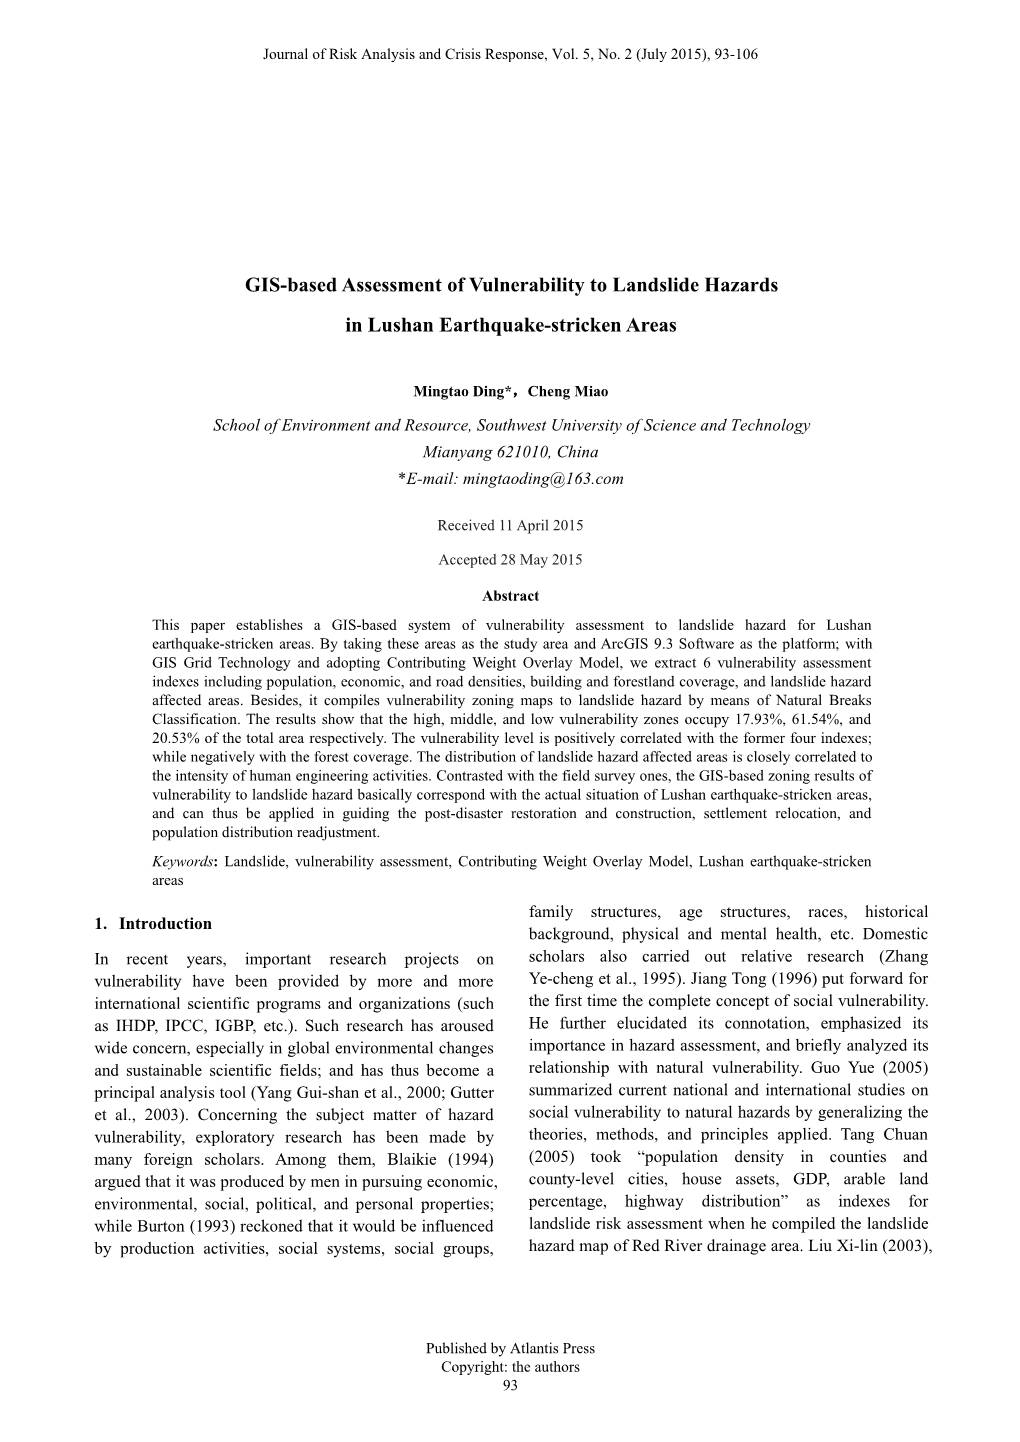 GIS-Based Assessment of Vulnerability to Landslide Hazards in Lushan Earthquake-Stricken Areas